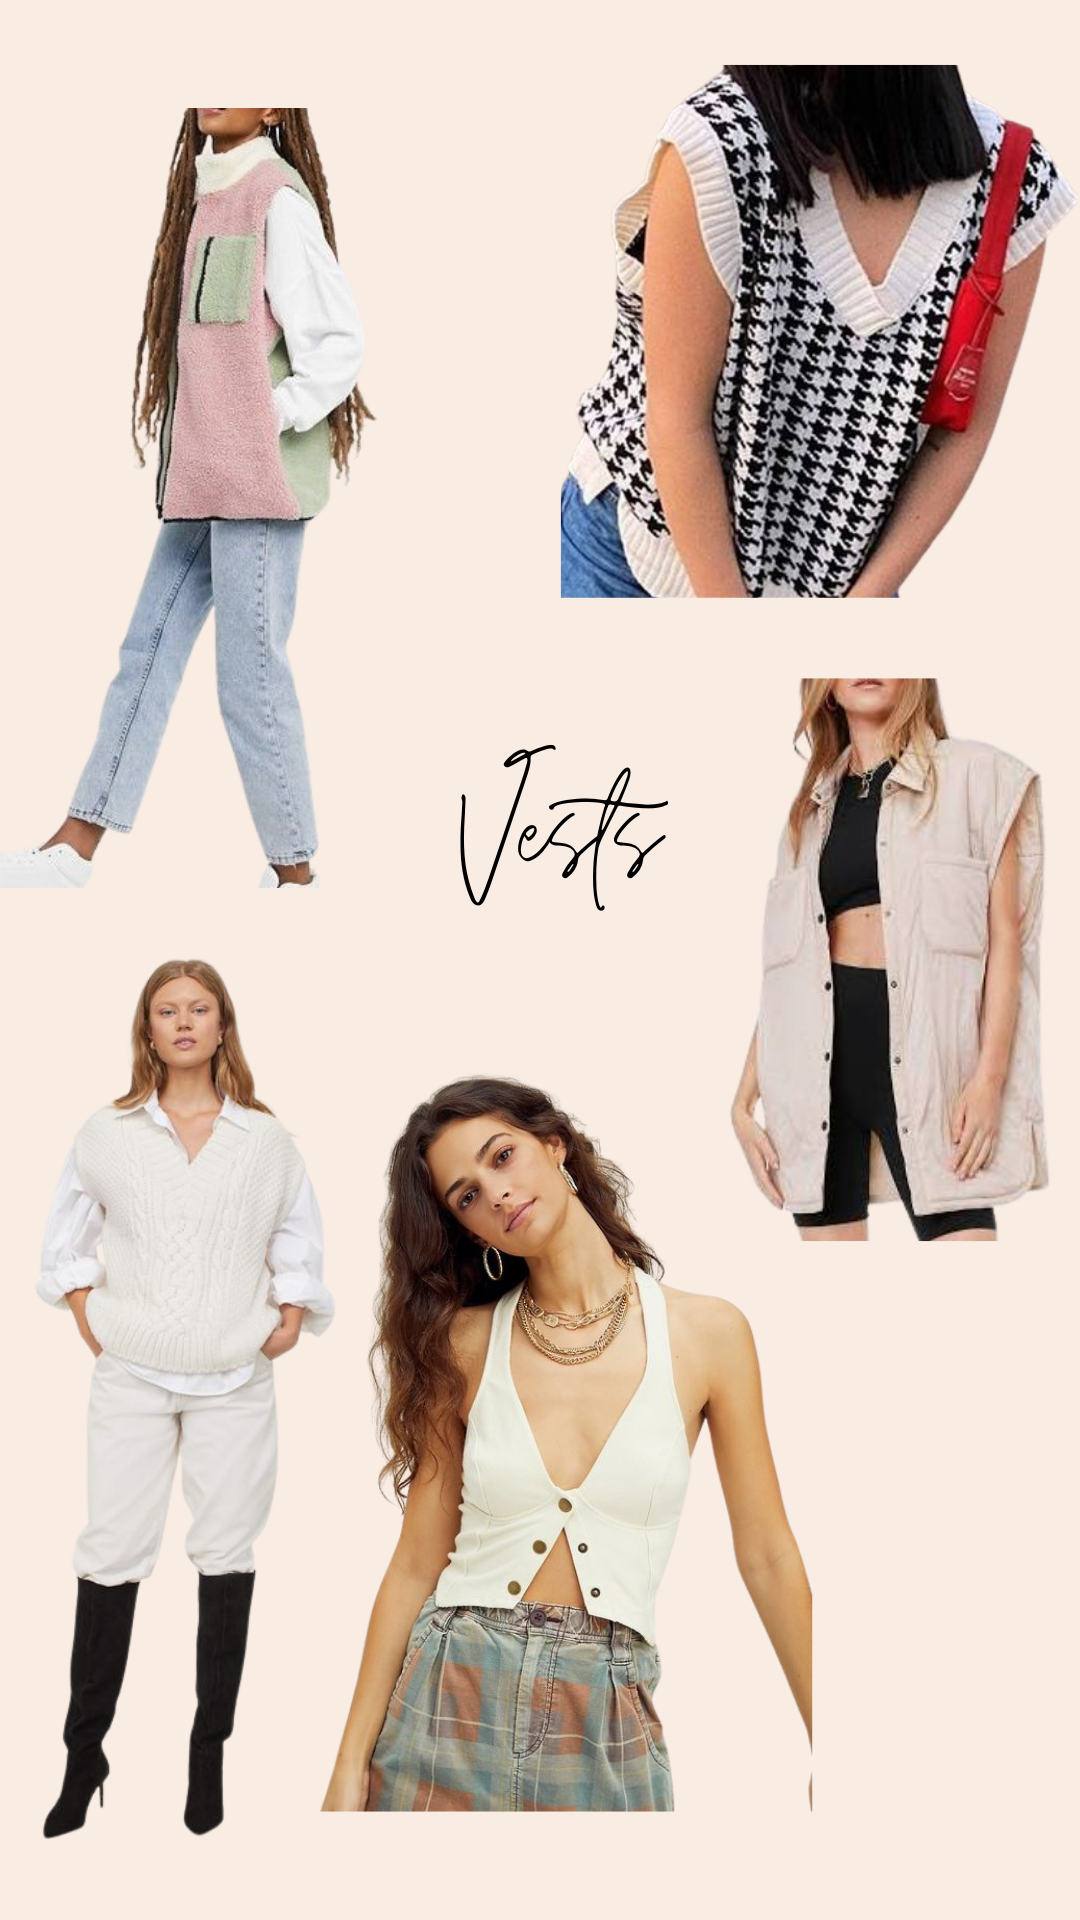 5) Vests - I’ll admit I’ve never been a vest gal. Maybe because they just don’t feel feminine to me. But these pictured, I would totally wear! My favorite vest trend I’m seeing is wearing a long button down shirt with a shorter sweater vest on top as a dress.